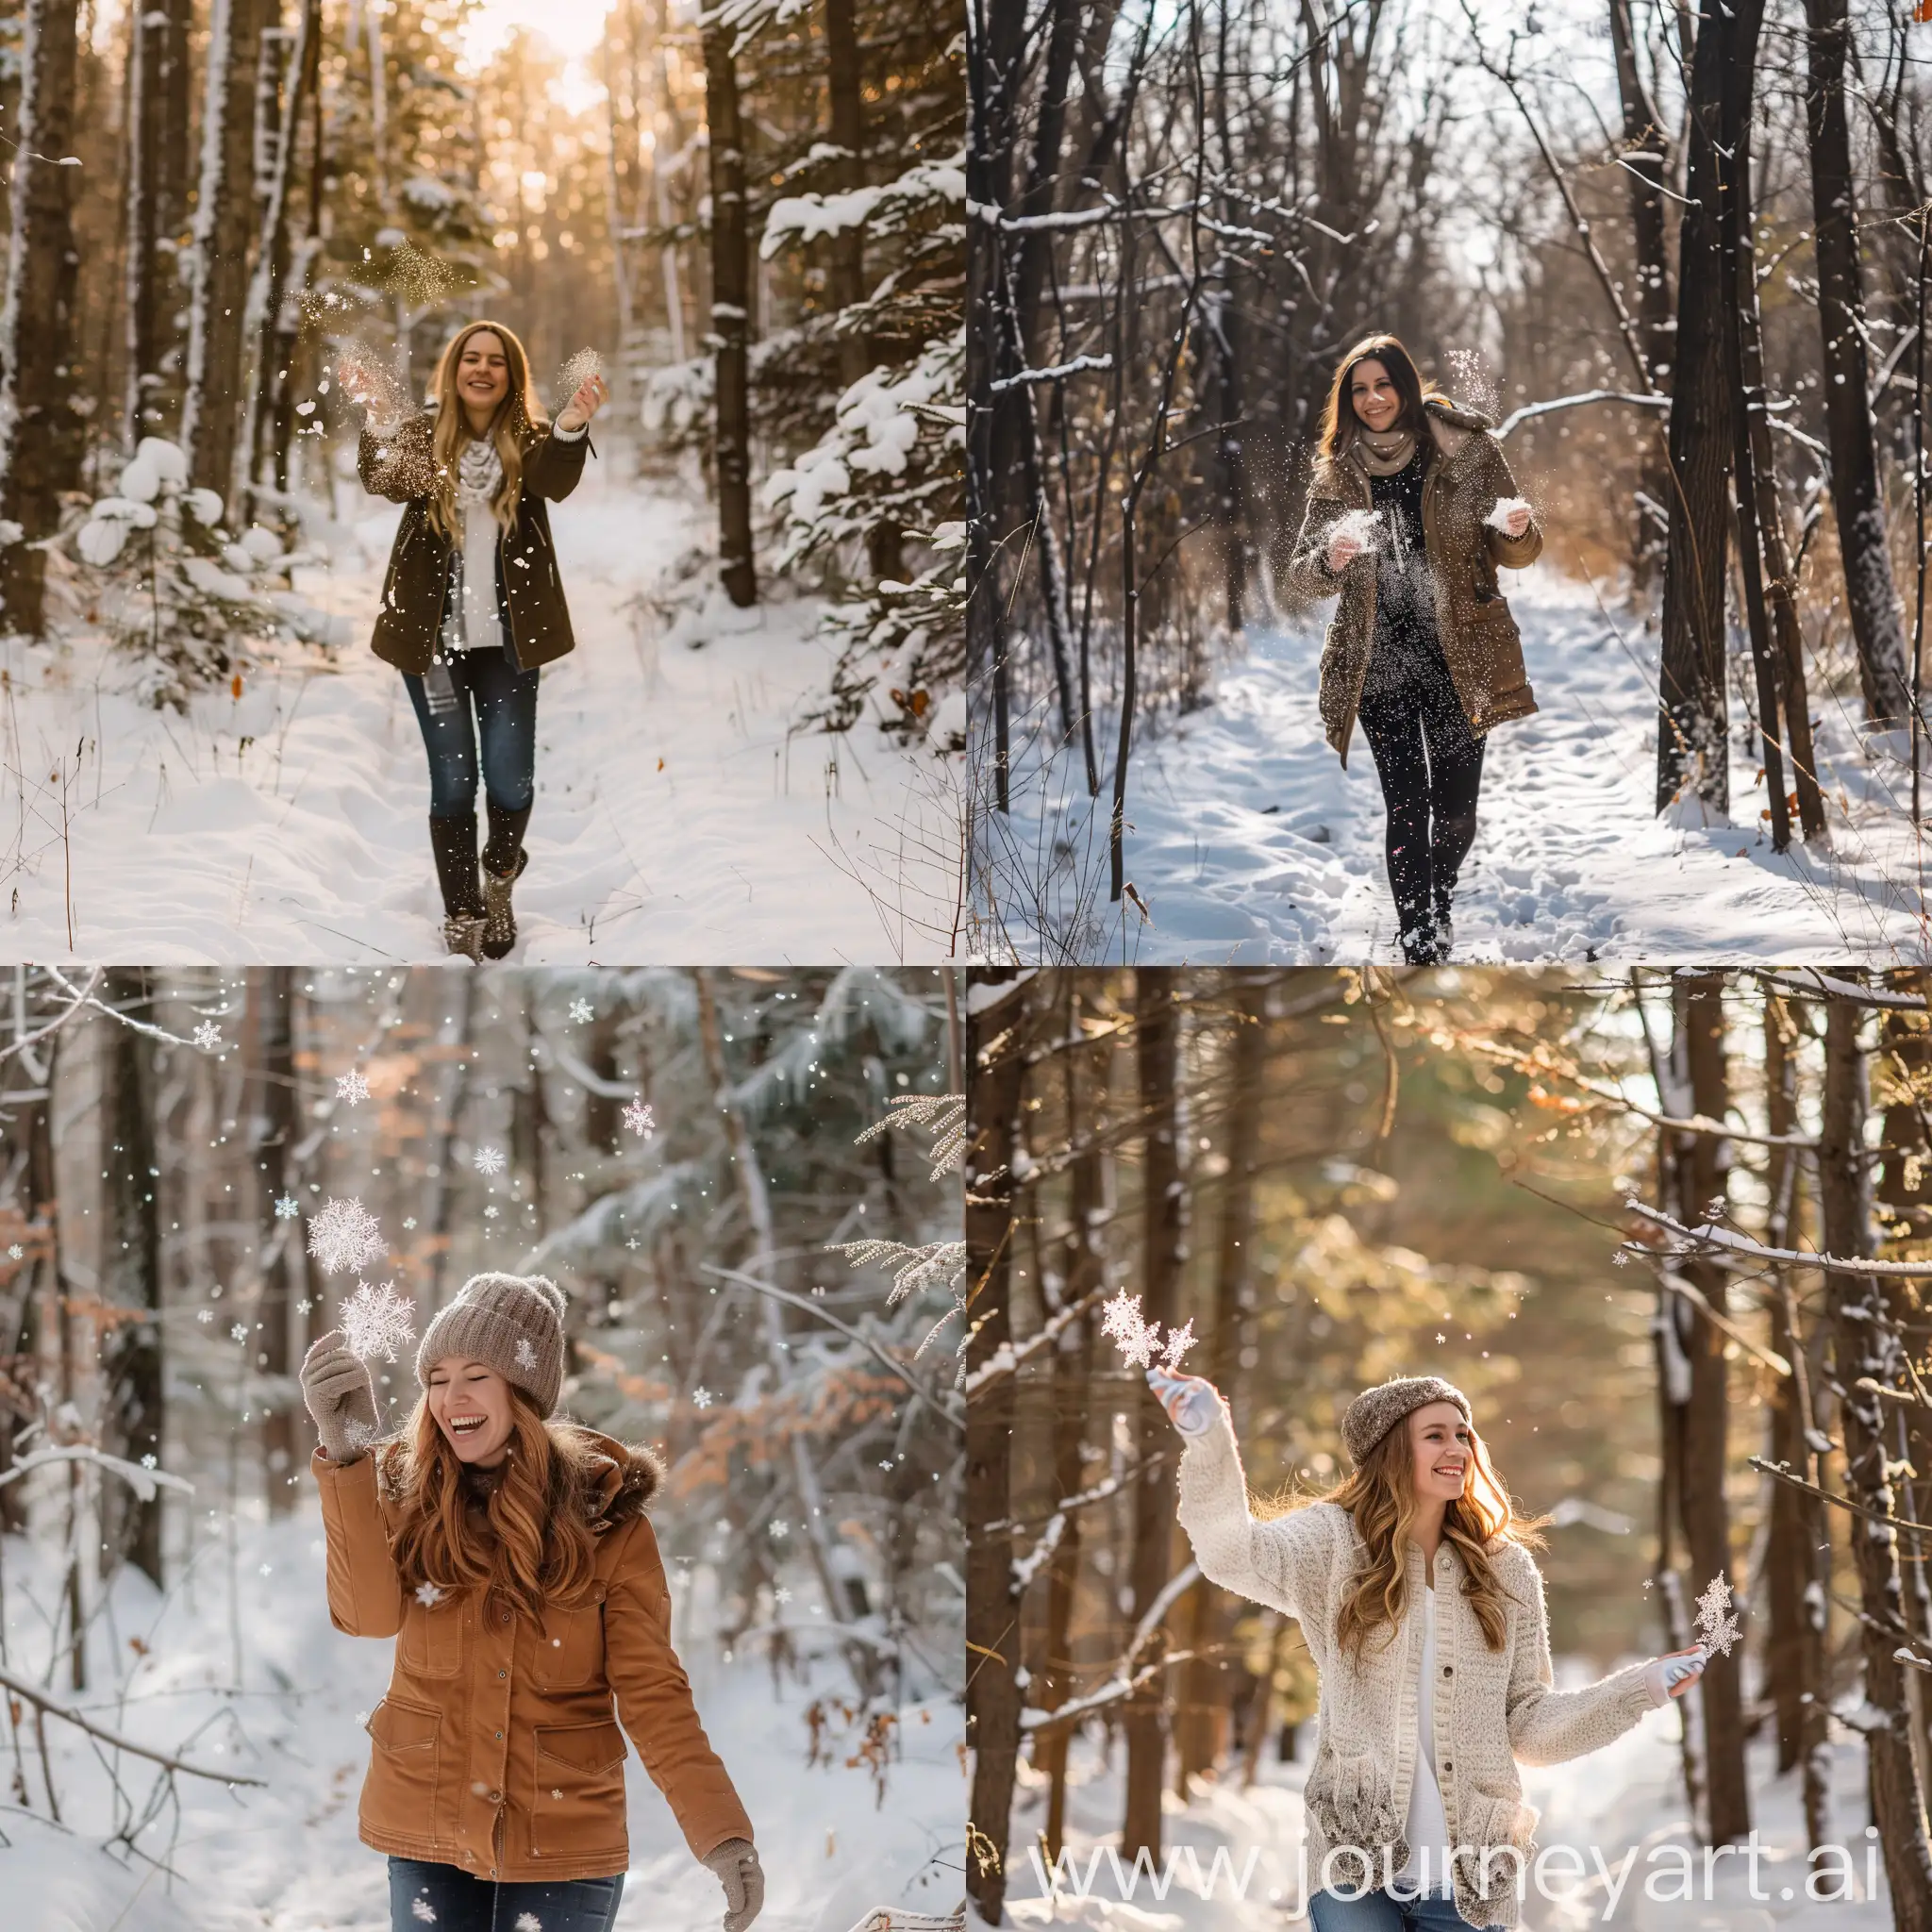 Joyful-Woman-Catching-Snowflakes-in-Enchanting-Snowy-Forest